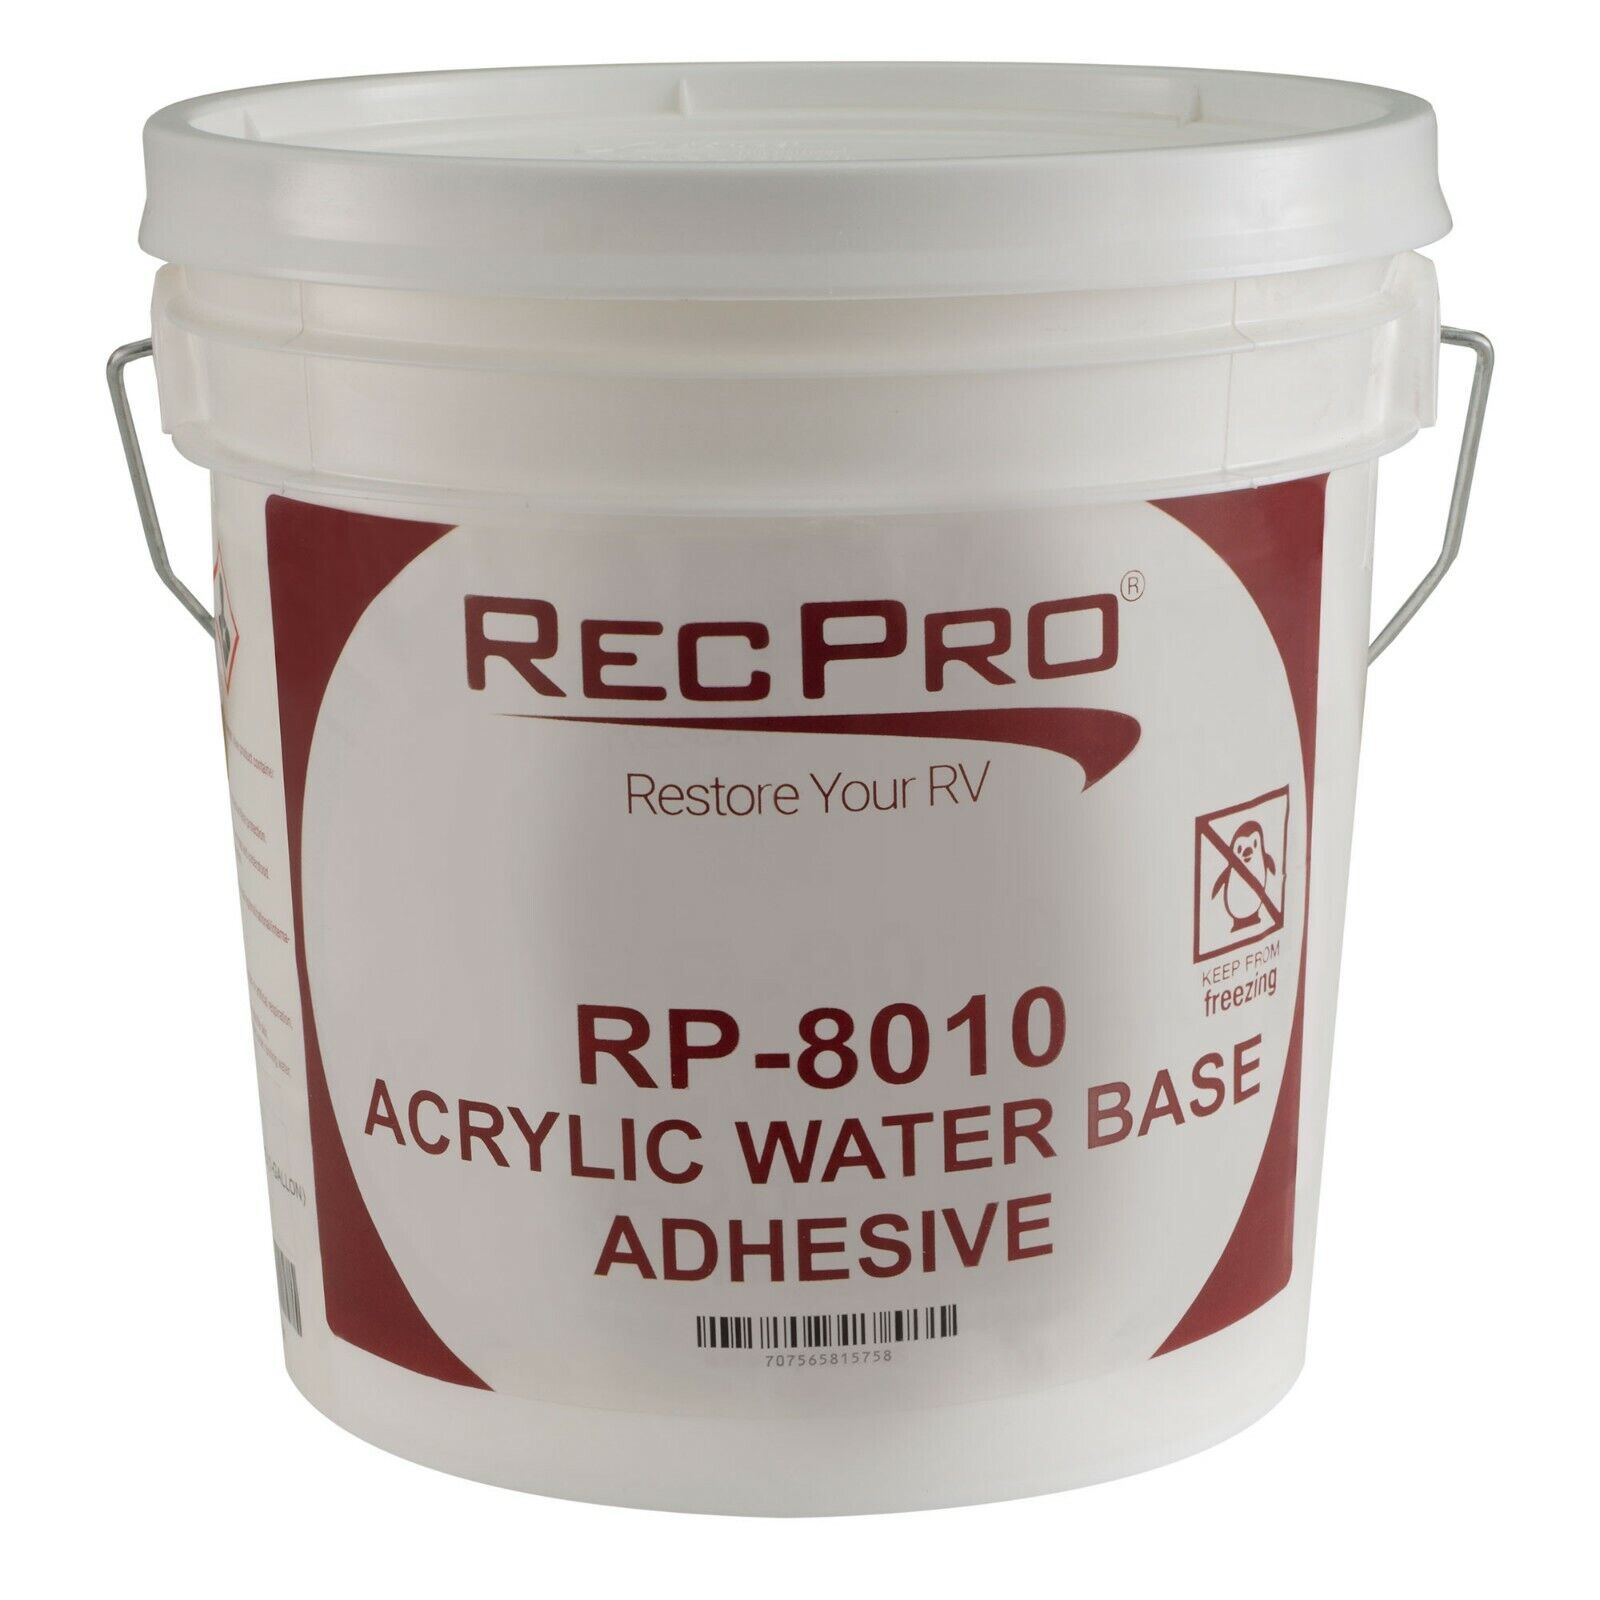 RV Rubber Roof Adhesive 8010 1 Gallon Water-Based Universal RV Roof Glue